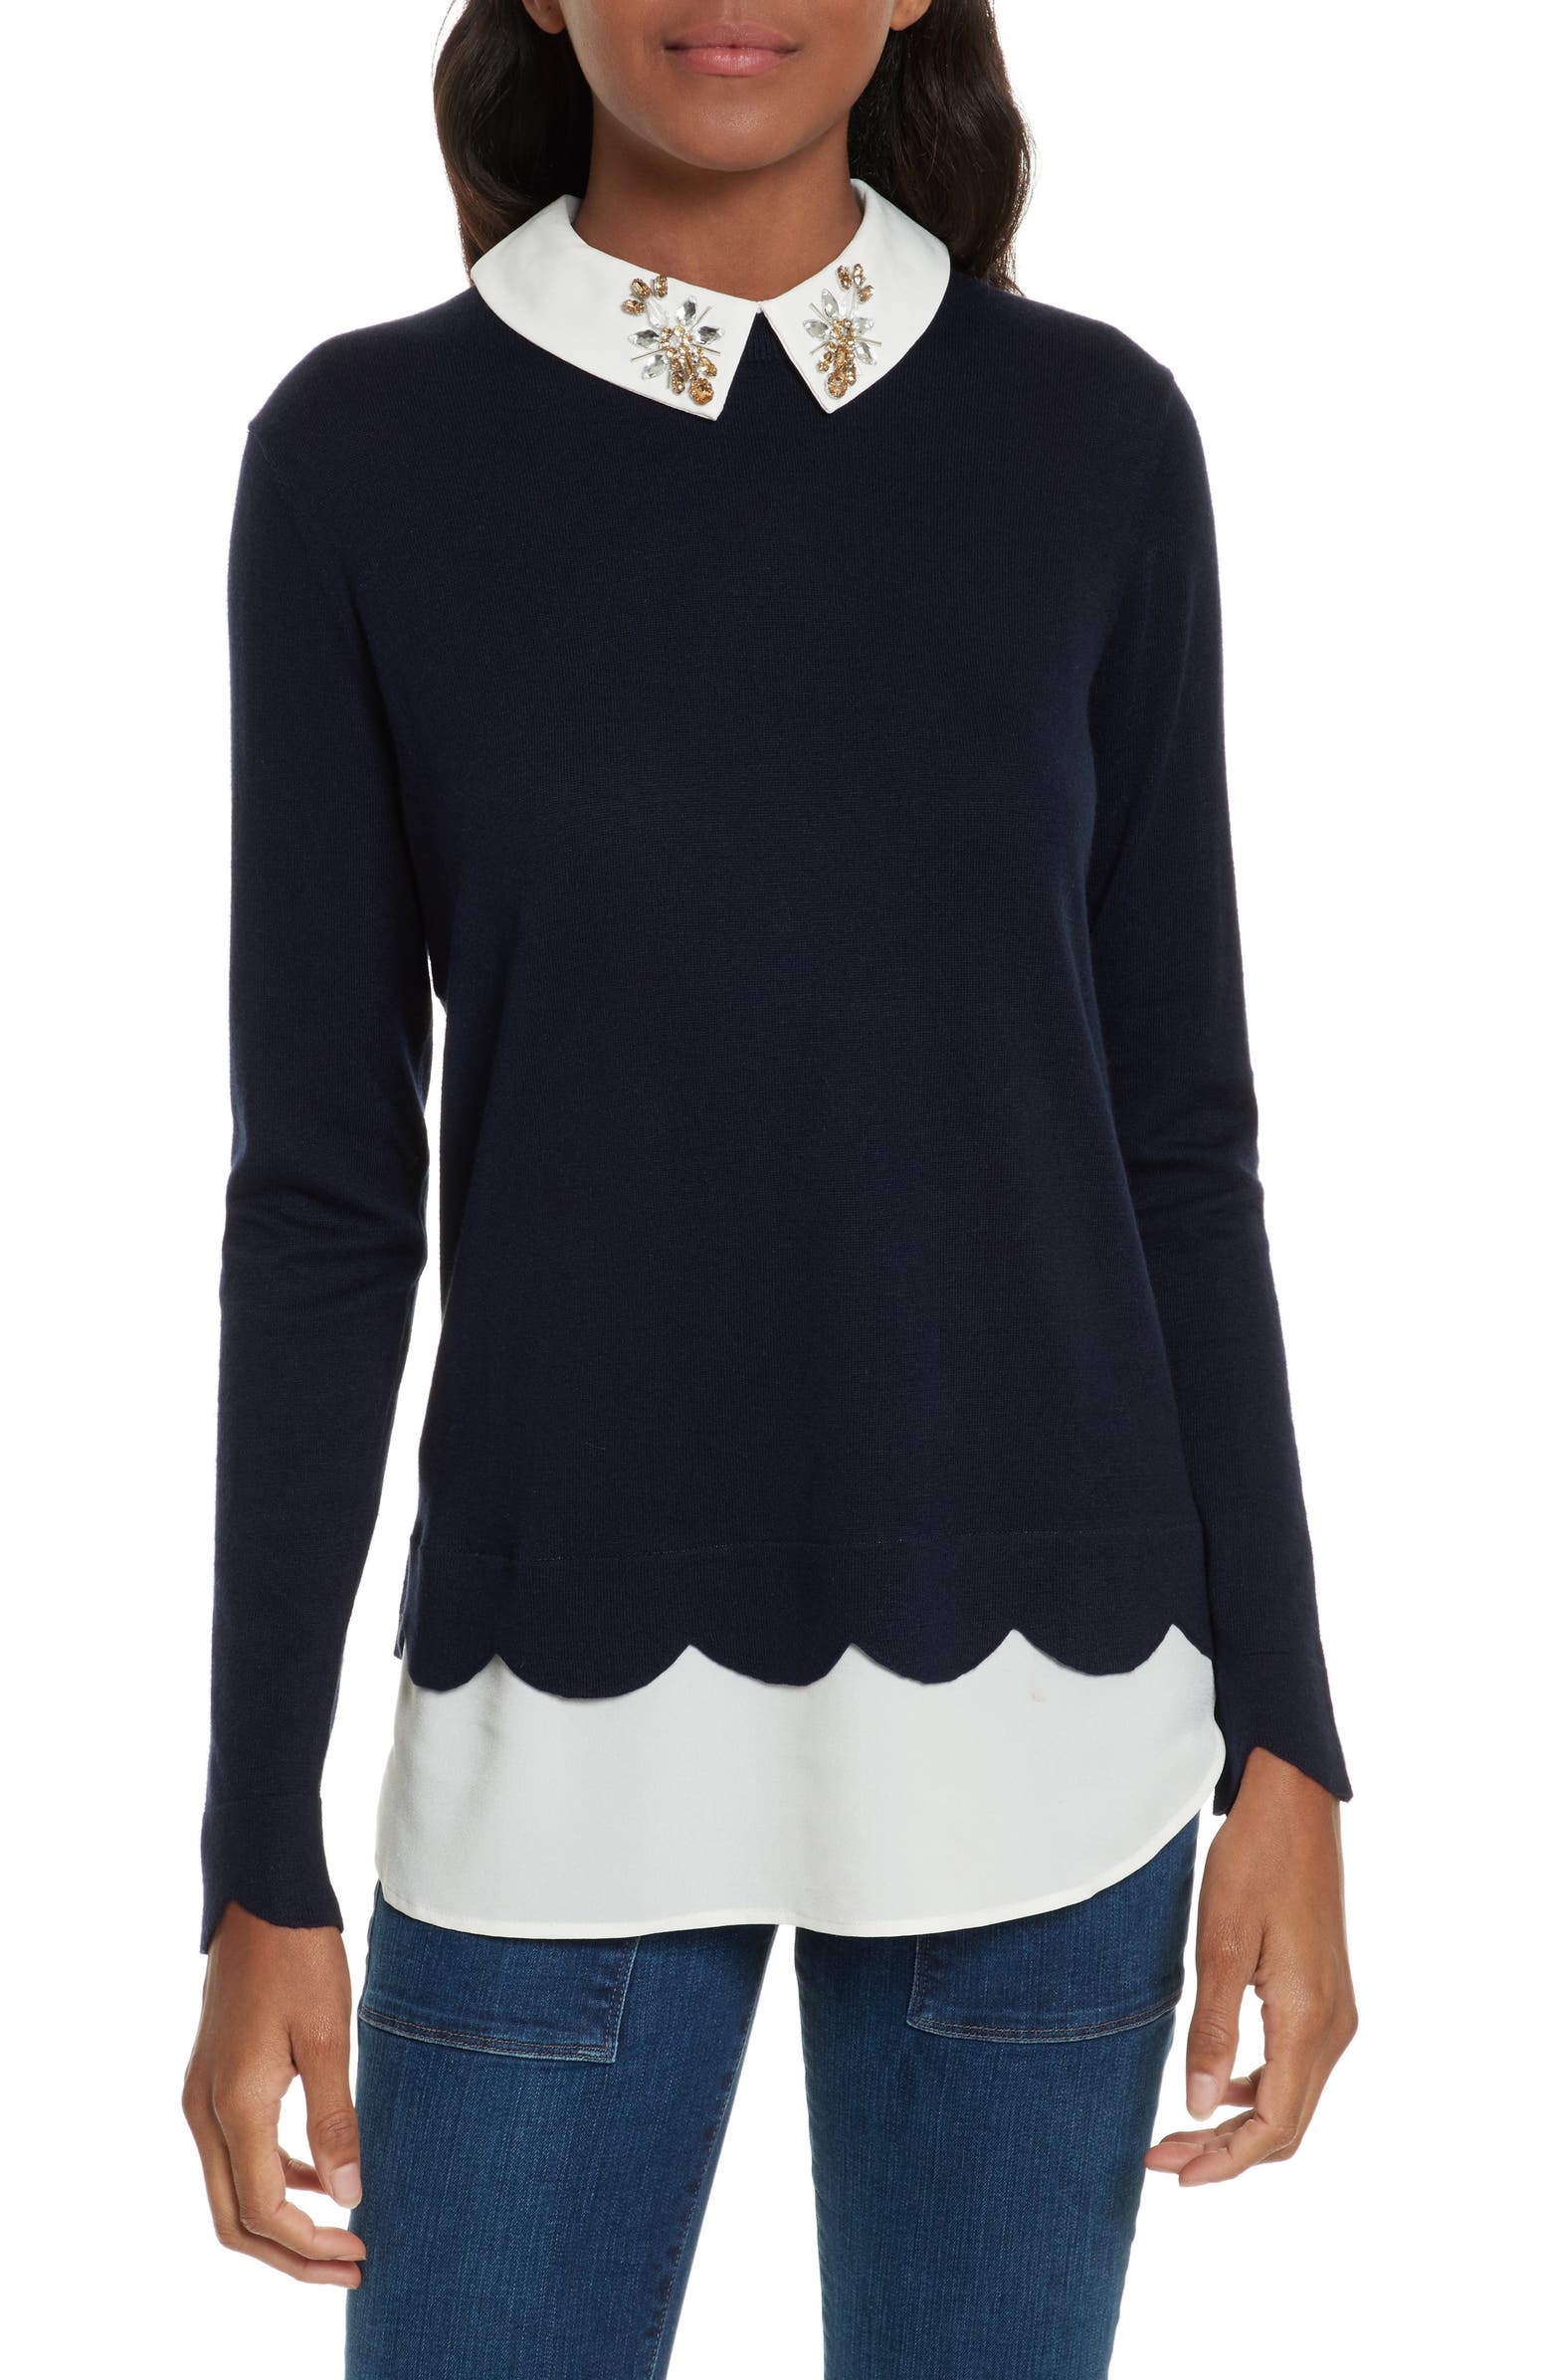 Ted Baker London Suzaine Embellished Layered Look Sweater | Nordstrom